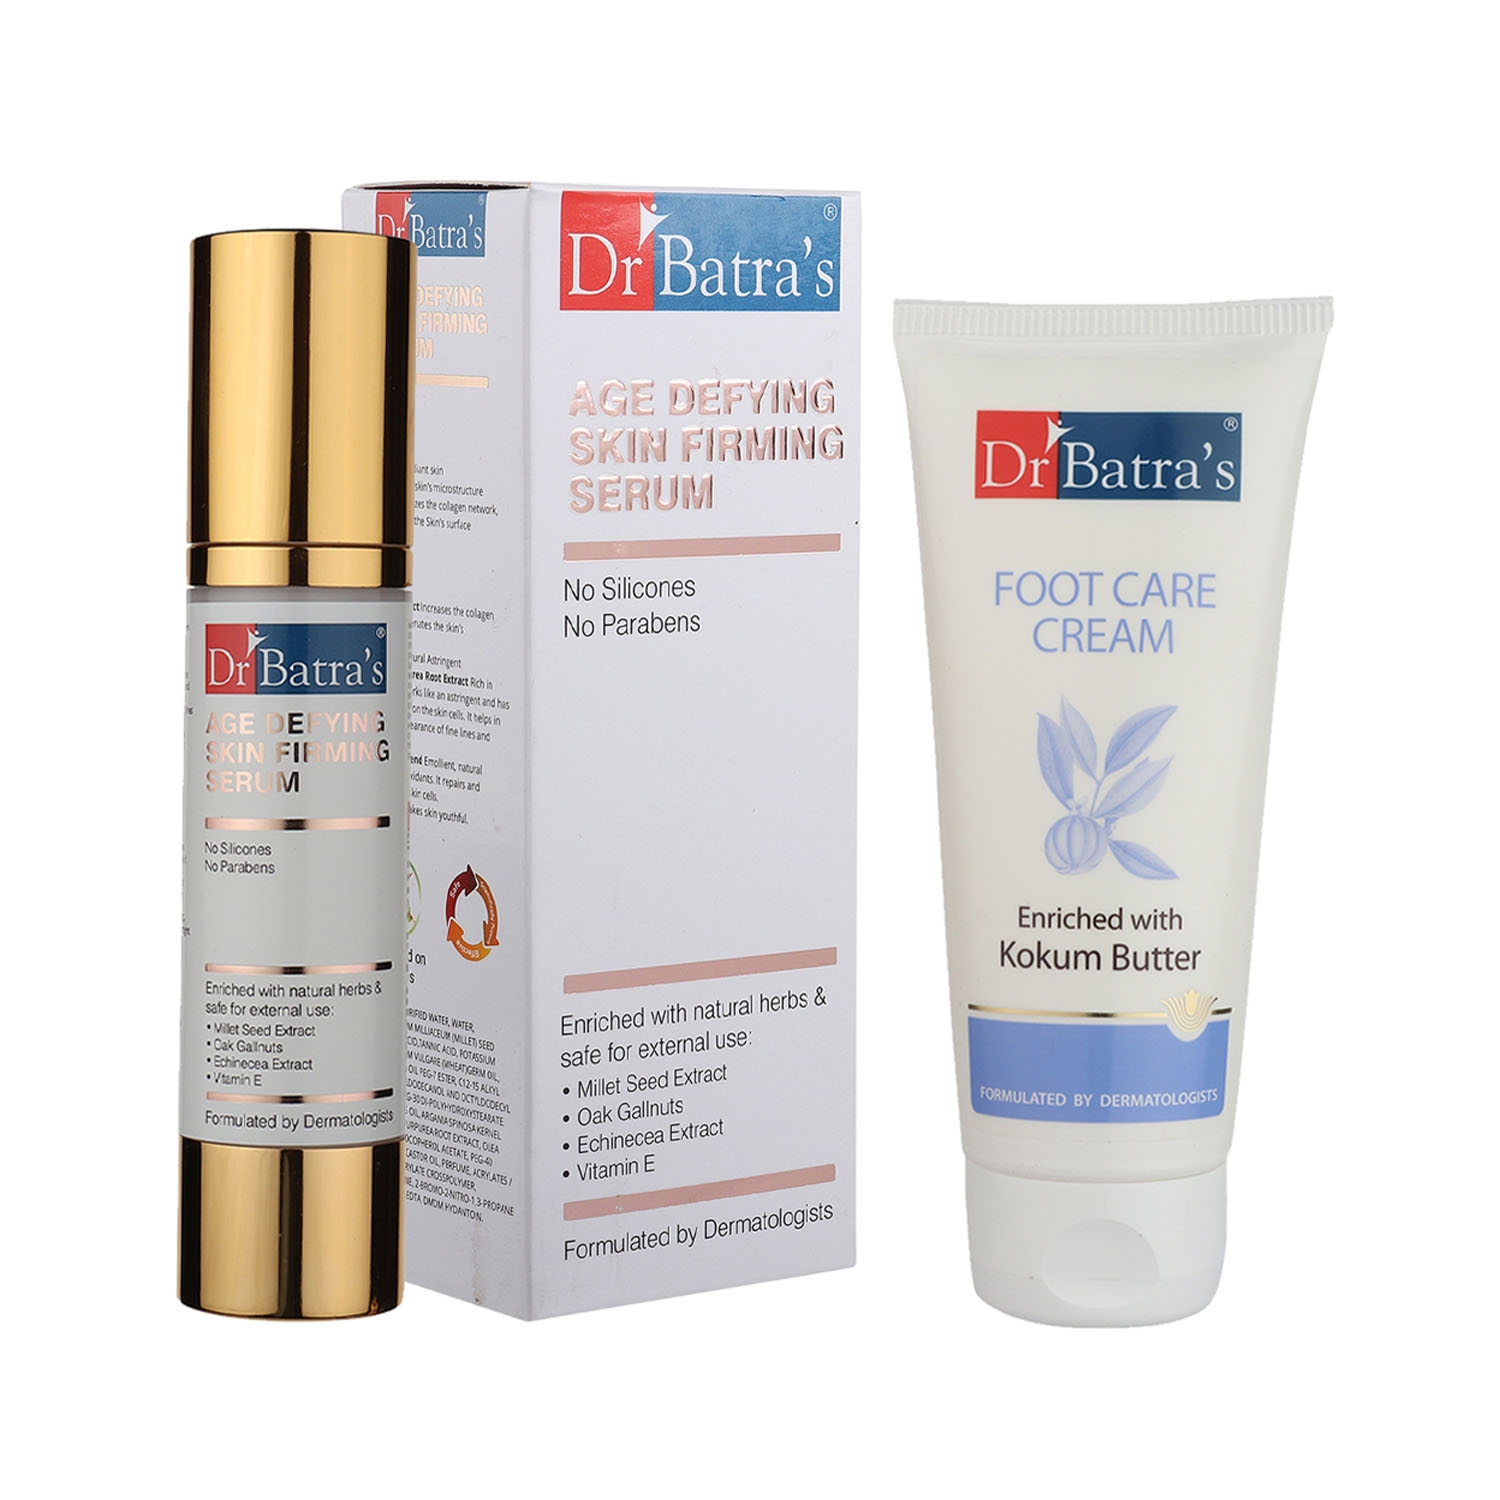 Dr Batra's | Dr Batra's Age defying Skin firming Serum - 50 g and Foot Care Cream - 100 gm (Pack of 2 Men and Women)